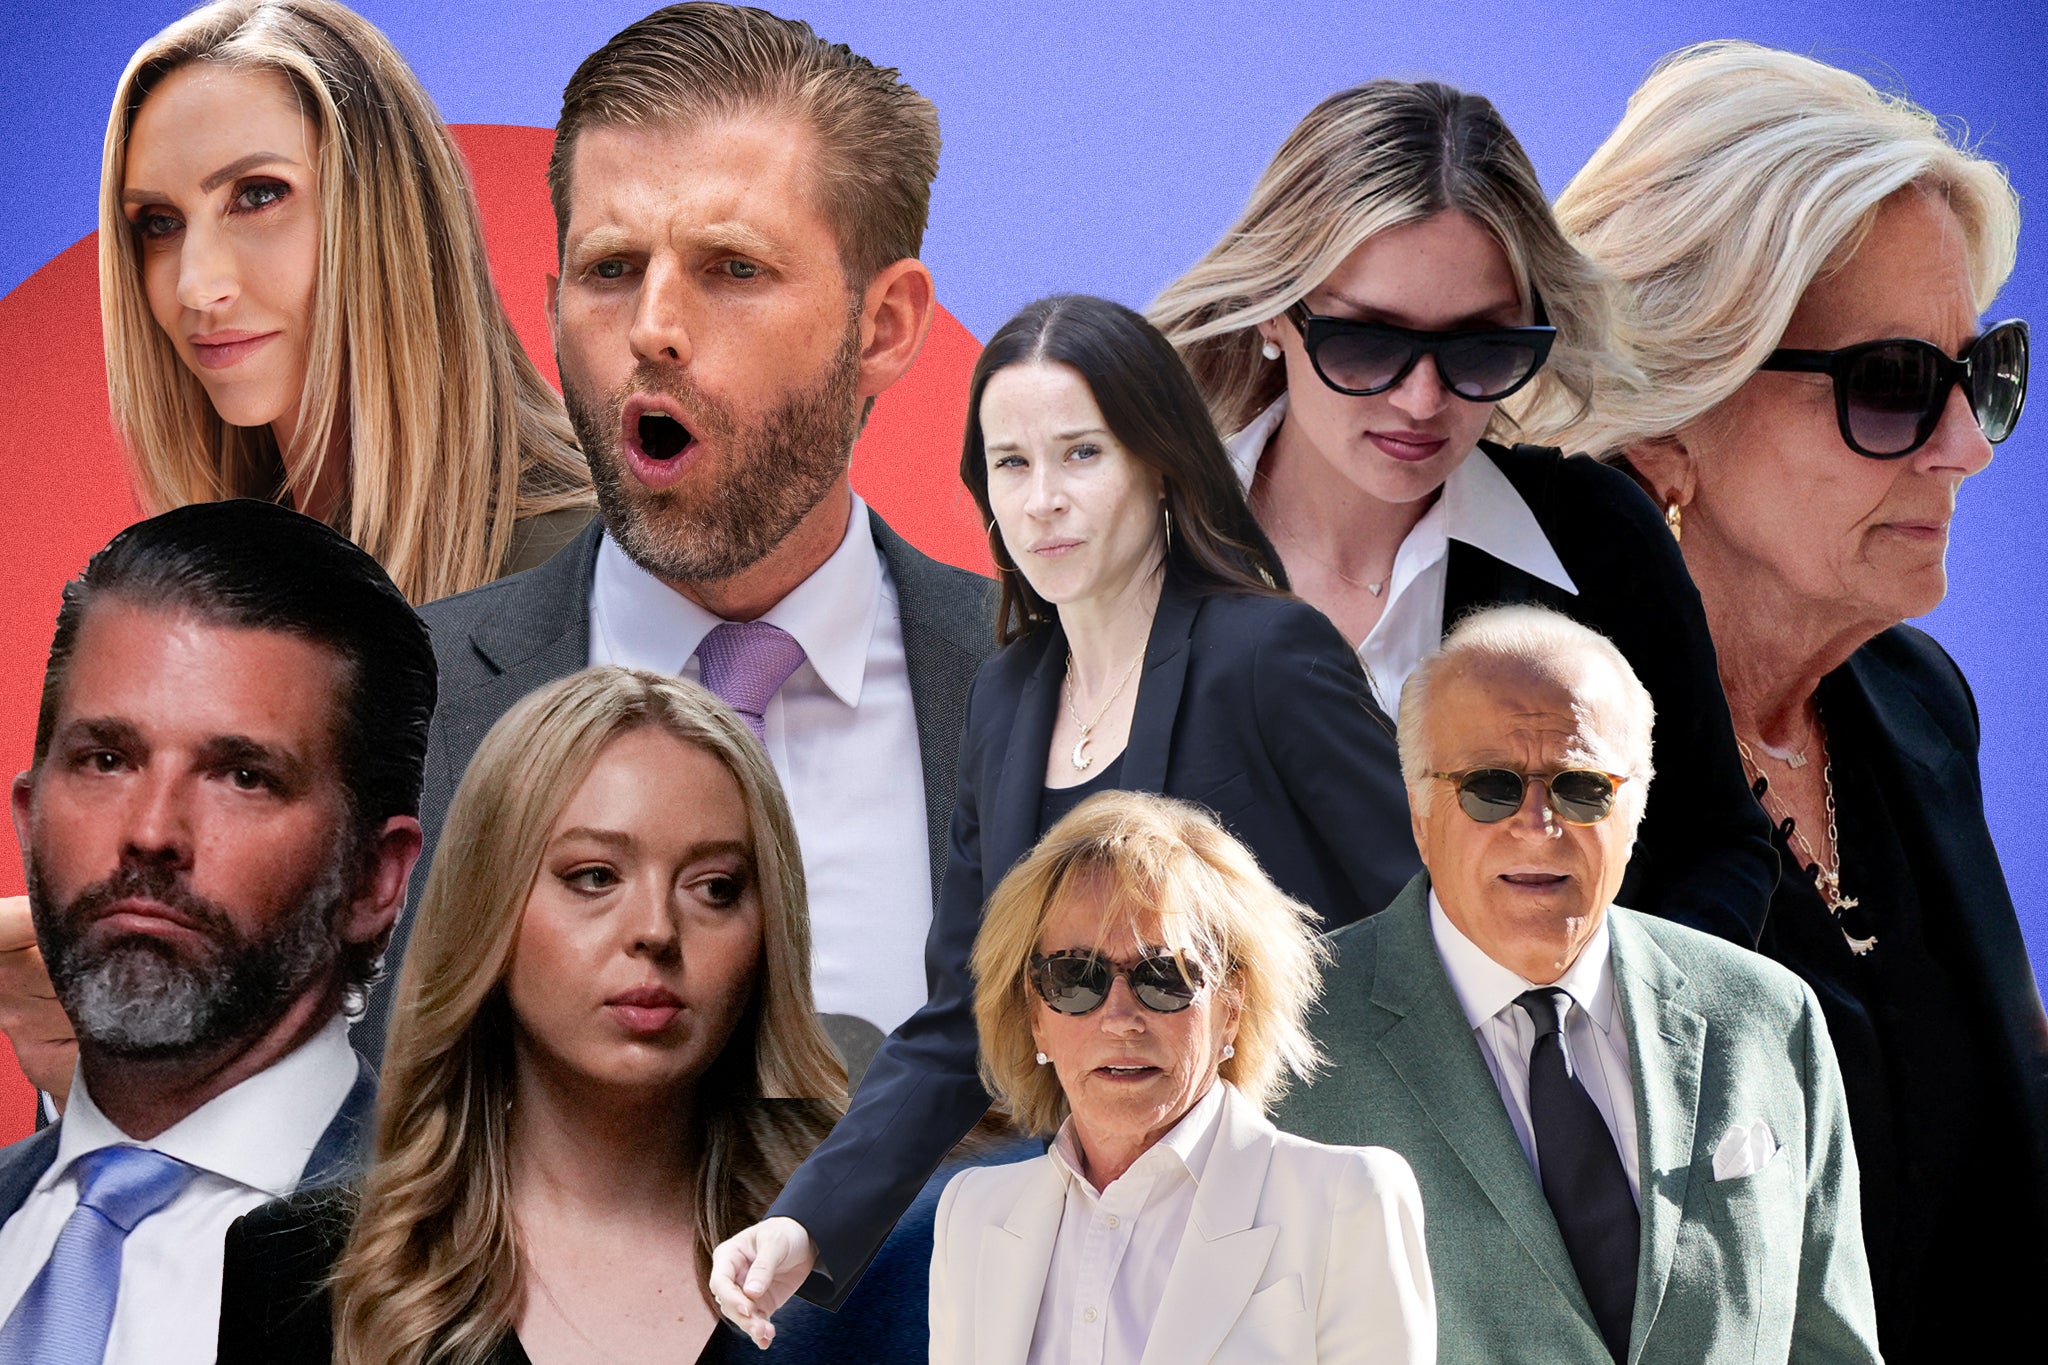 The Biden family has taken a different approach to supporting Hunter as he faces criminal trial than the Trump family did for Donald